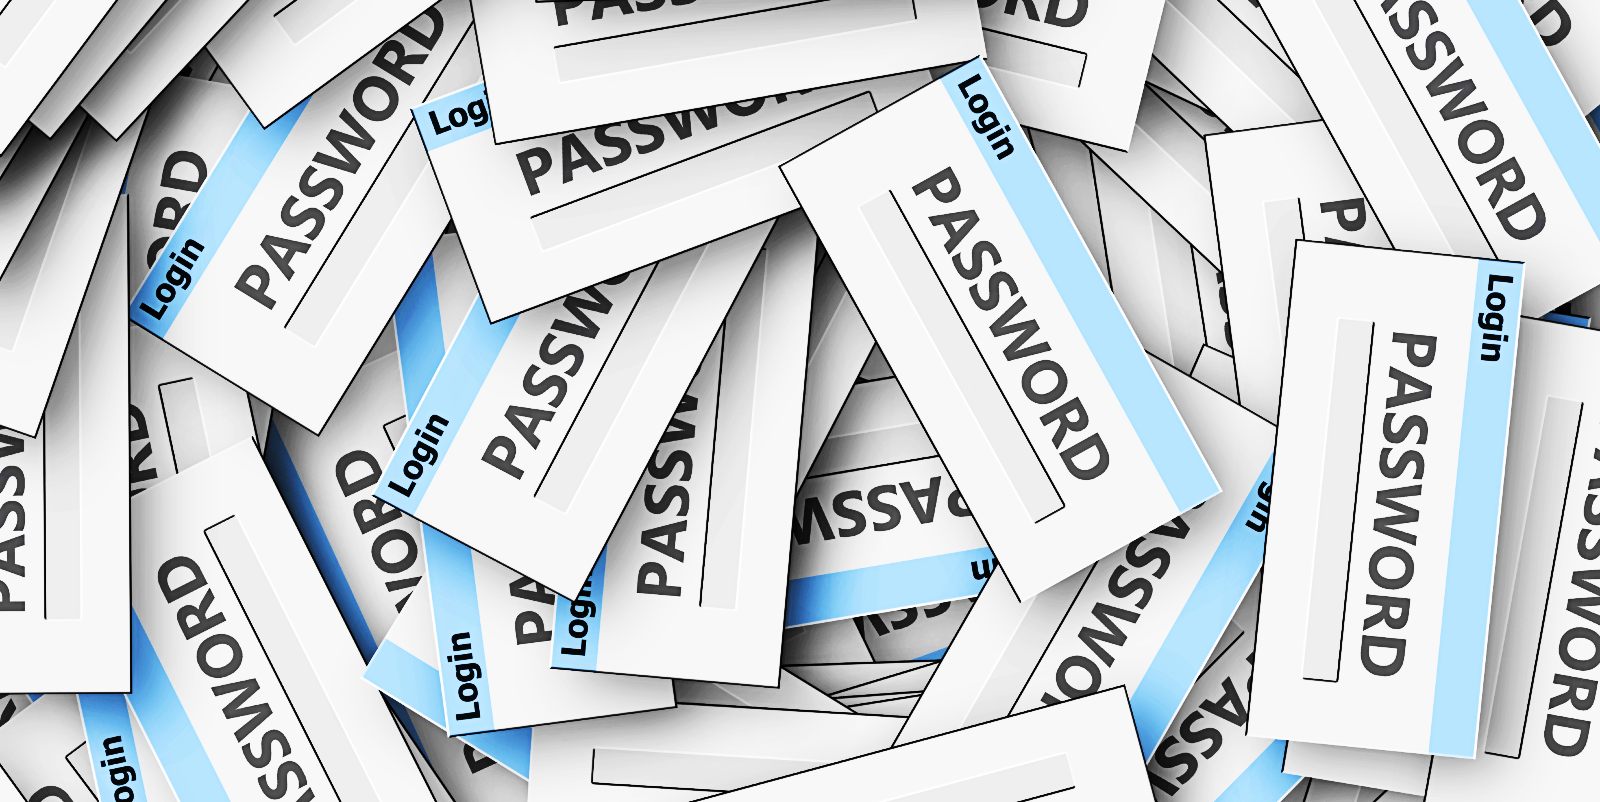 Passwordstate password manager hacked in supply chain attack